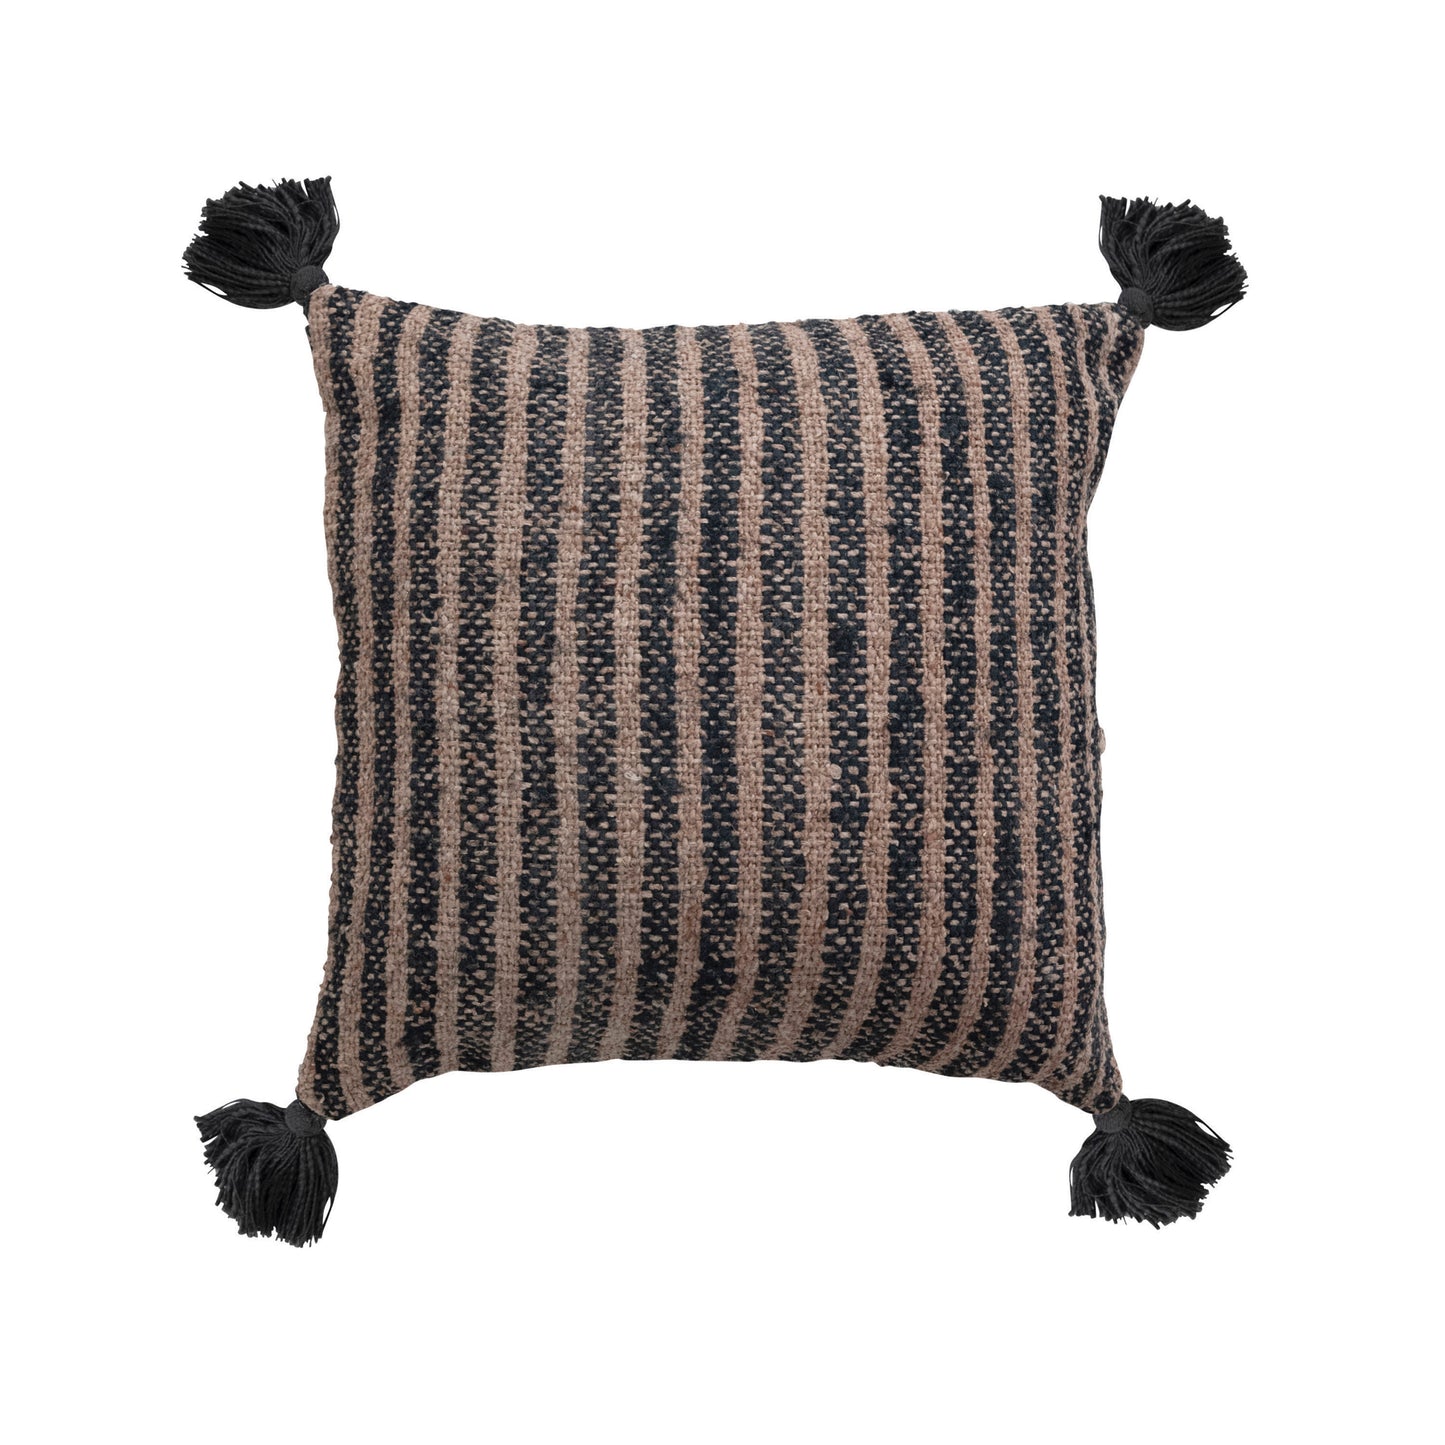 Woven Cotton Pillow with Stripes and Tassels